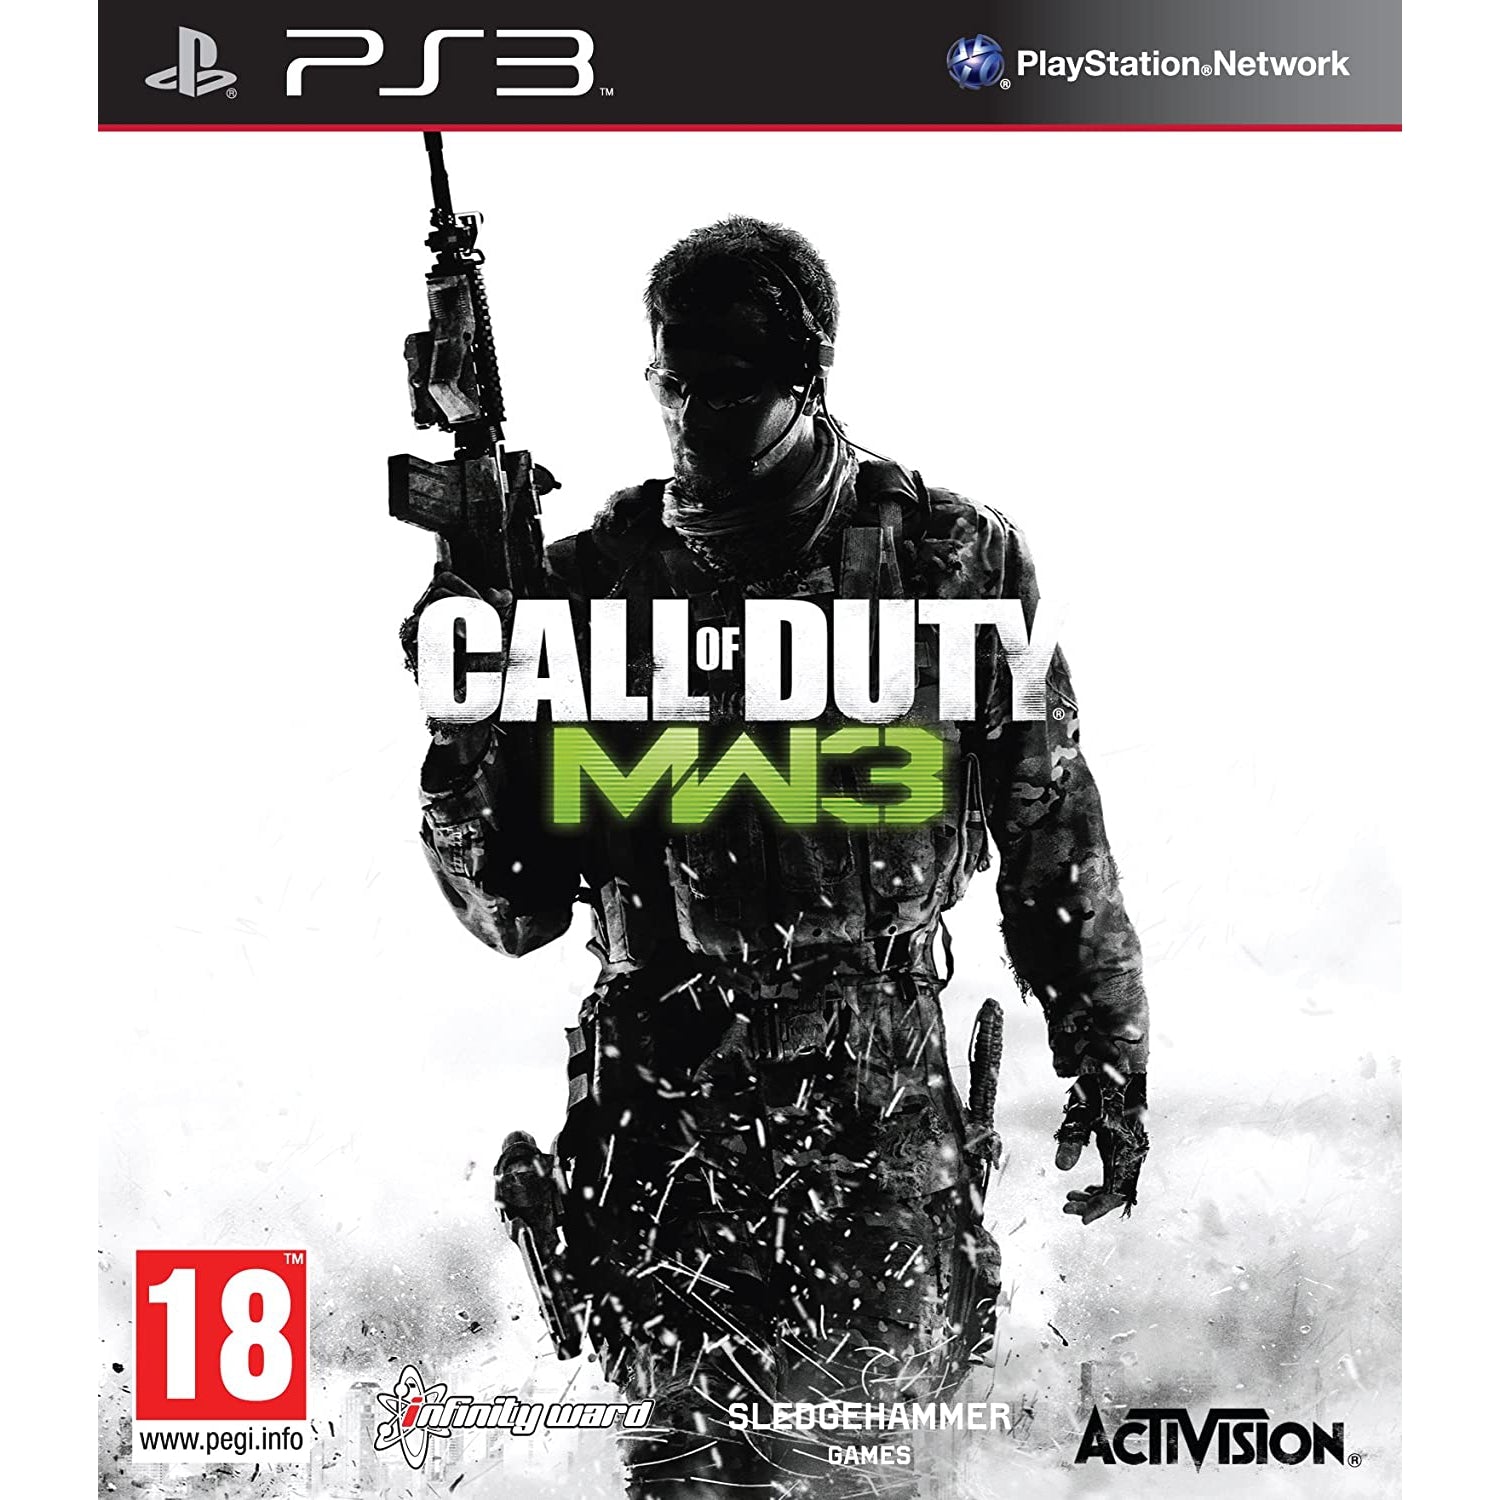 Call of Duty Modern Warfare 3 (PS3) - Refurbished Excellent